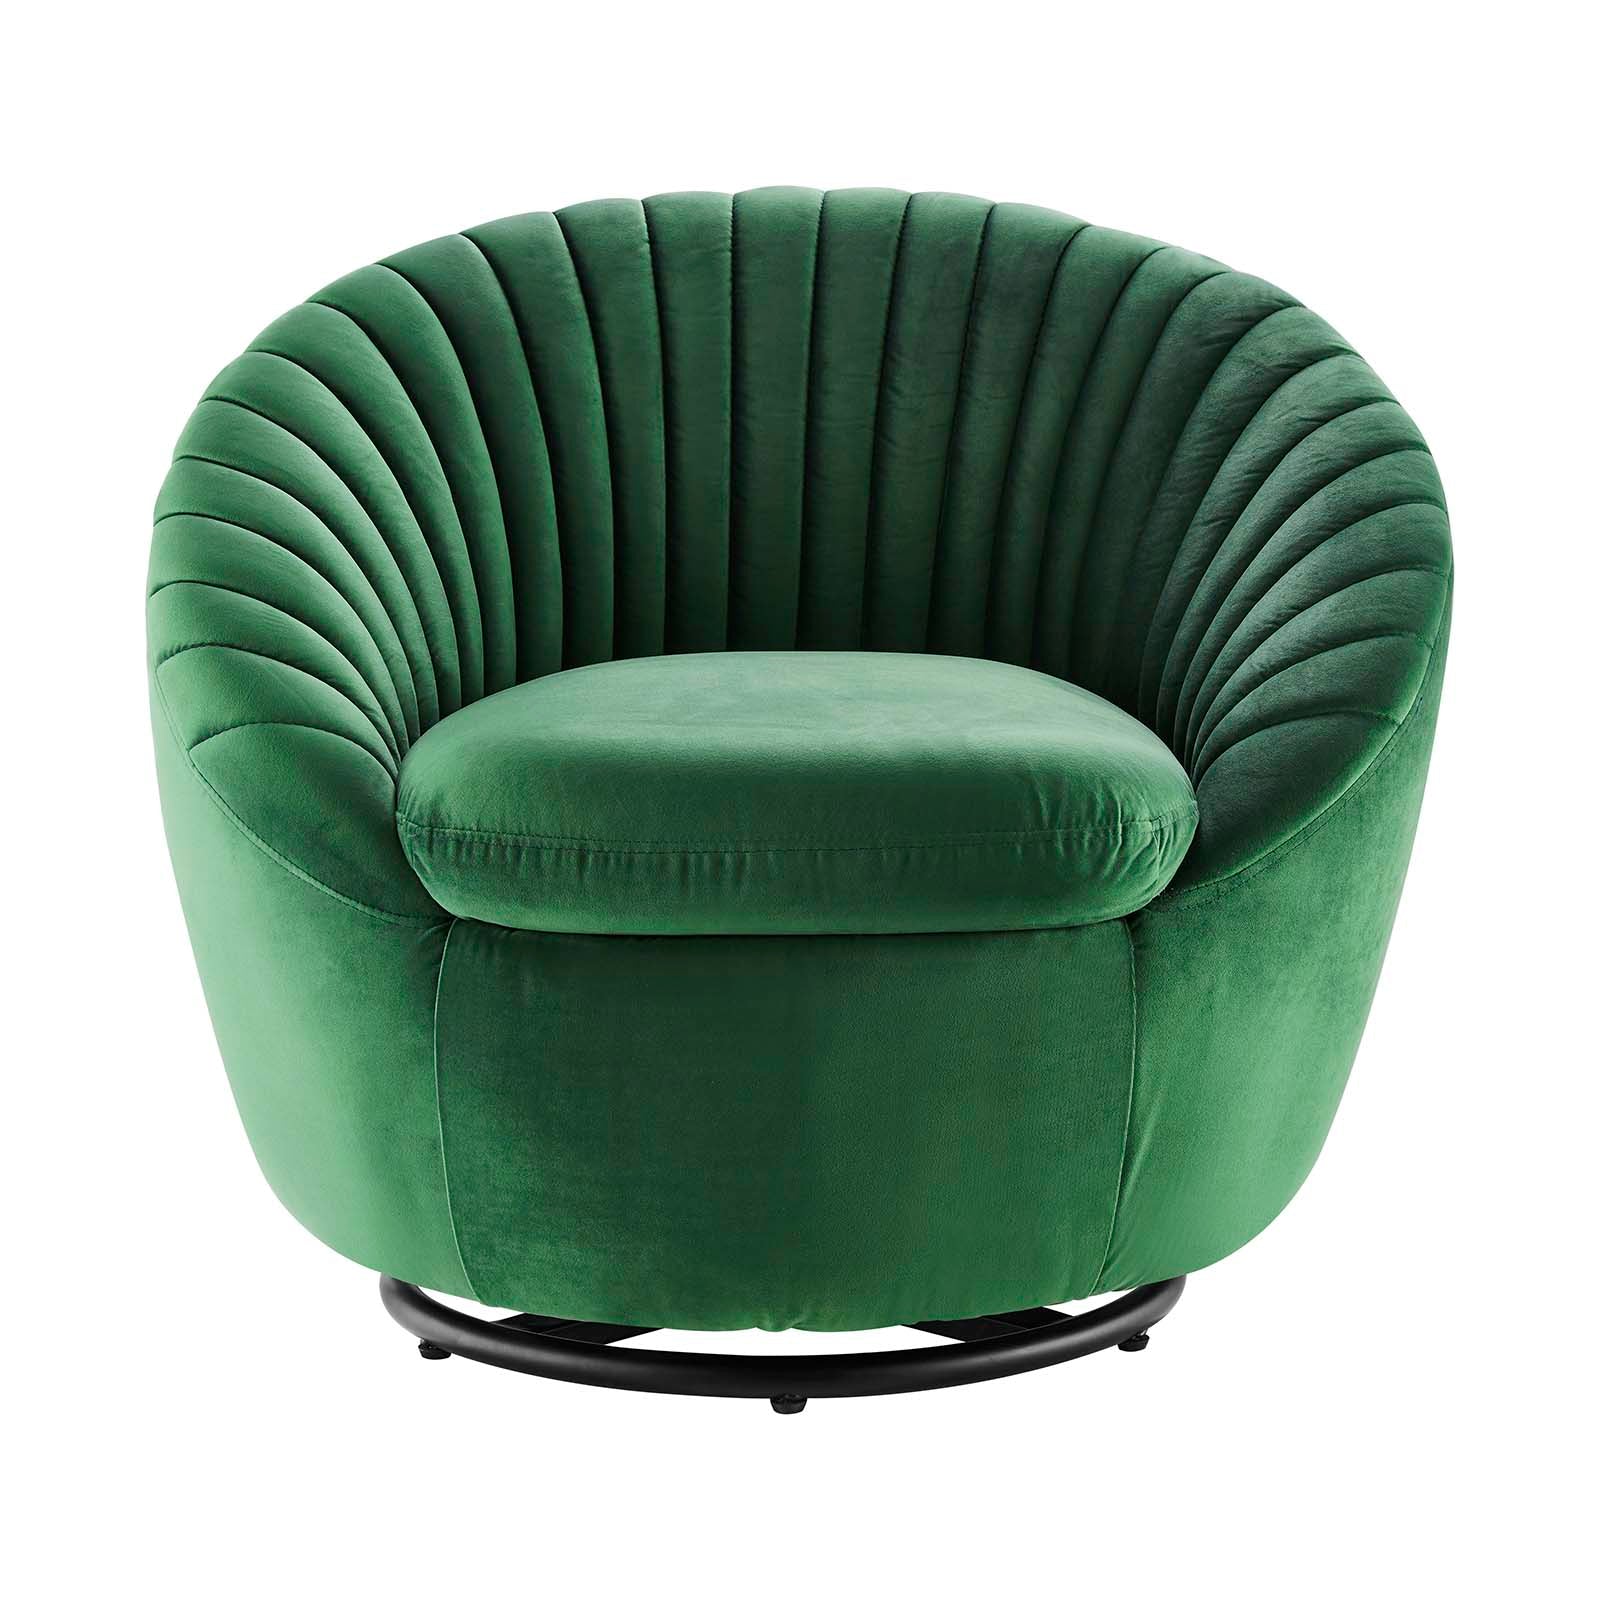 Modway Accent Chairs - Whirr Tufted Performance Velvet Performance Velvet Swivel Chair Black Emerald